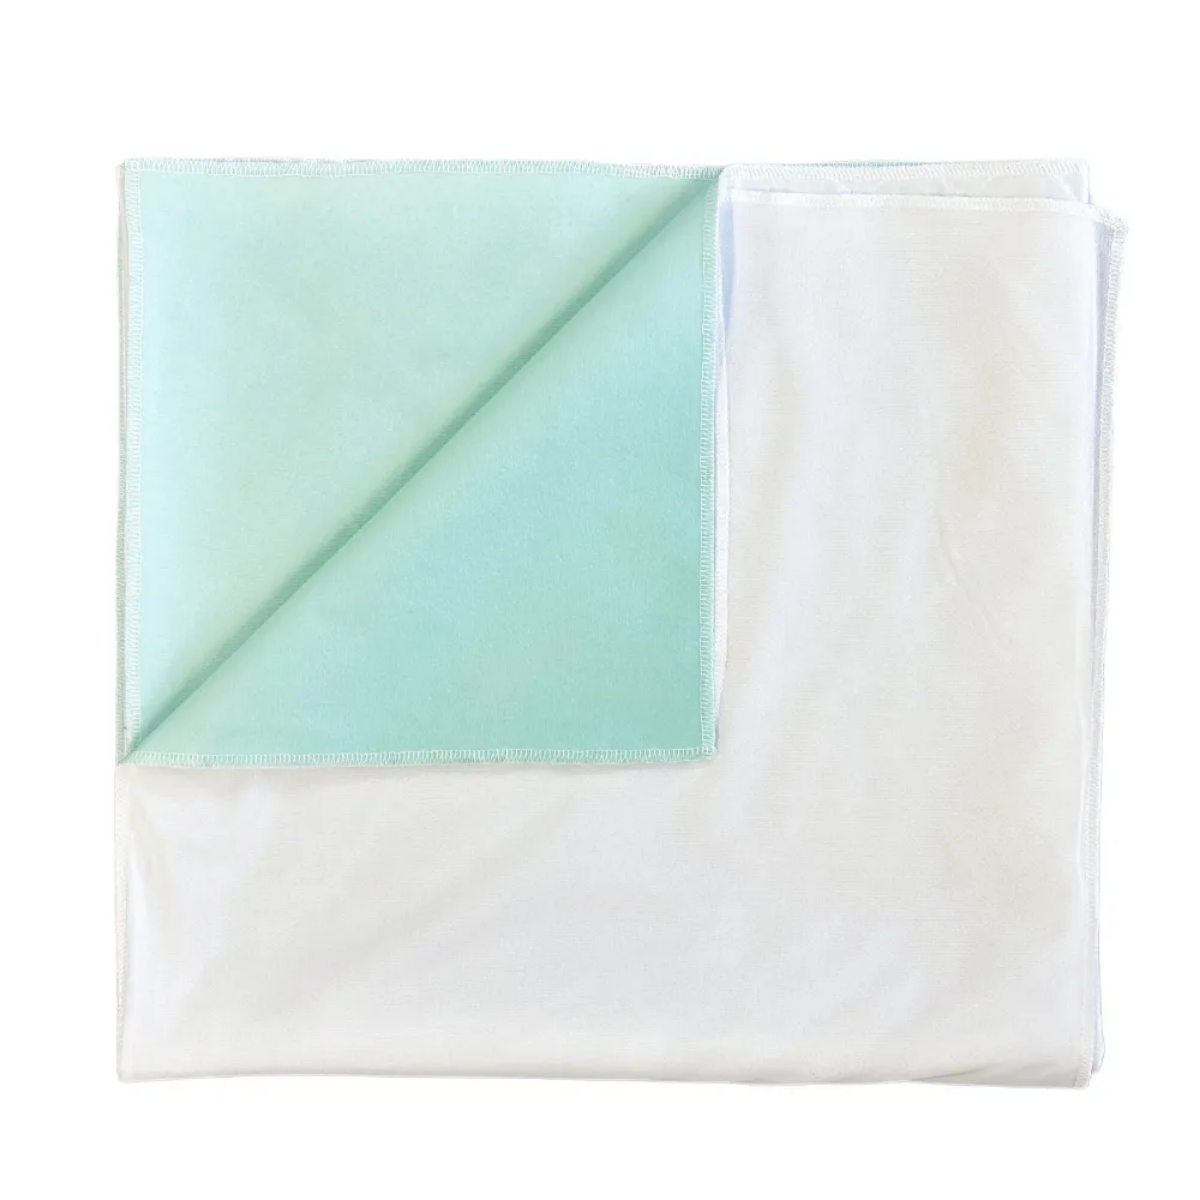 Washable bed pad in super green - 800 ml absorbency